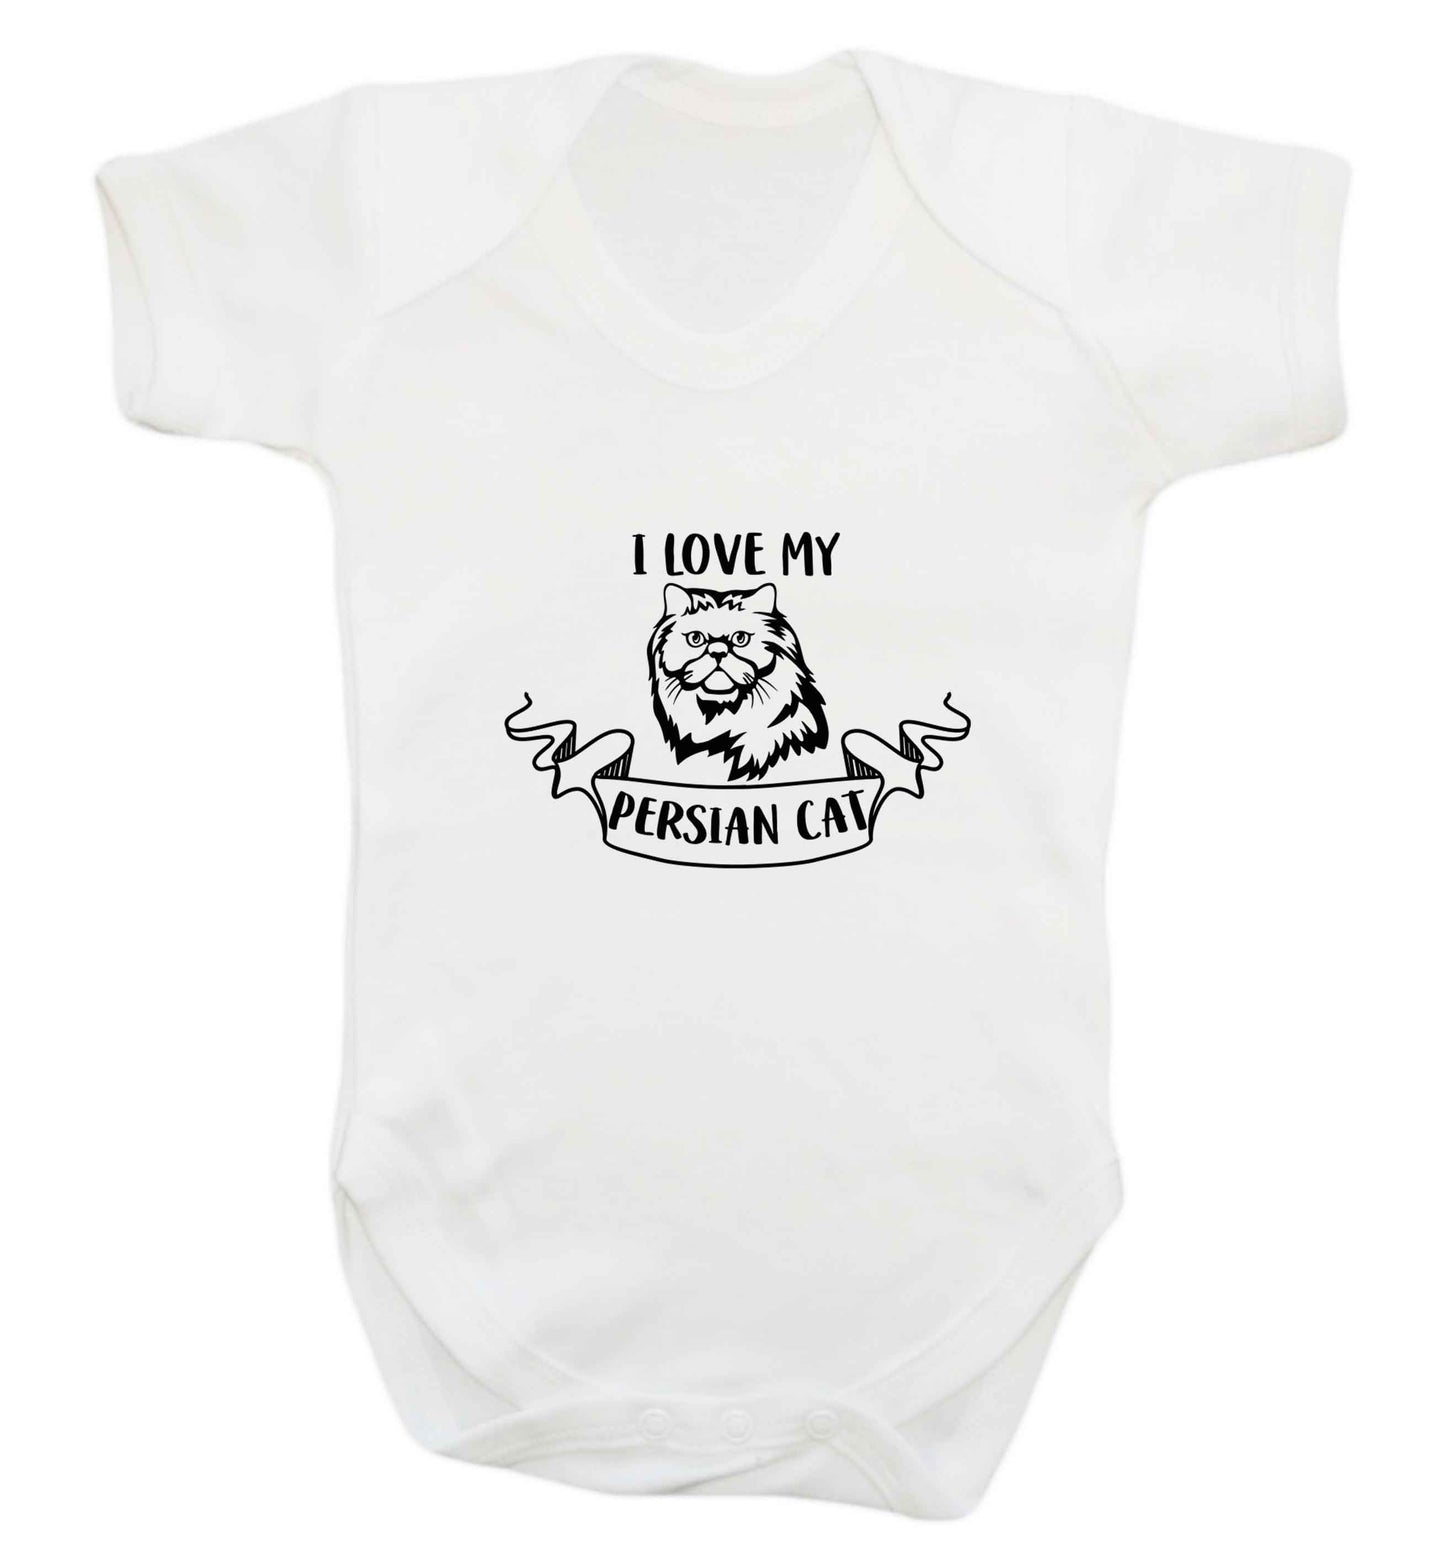 I love my persian cat baby vest white 18-24 months